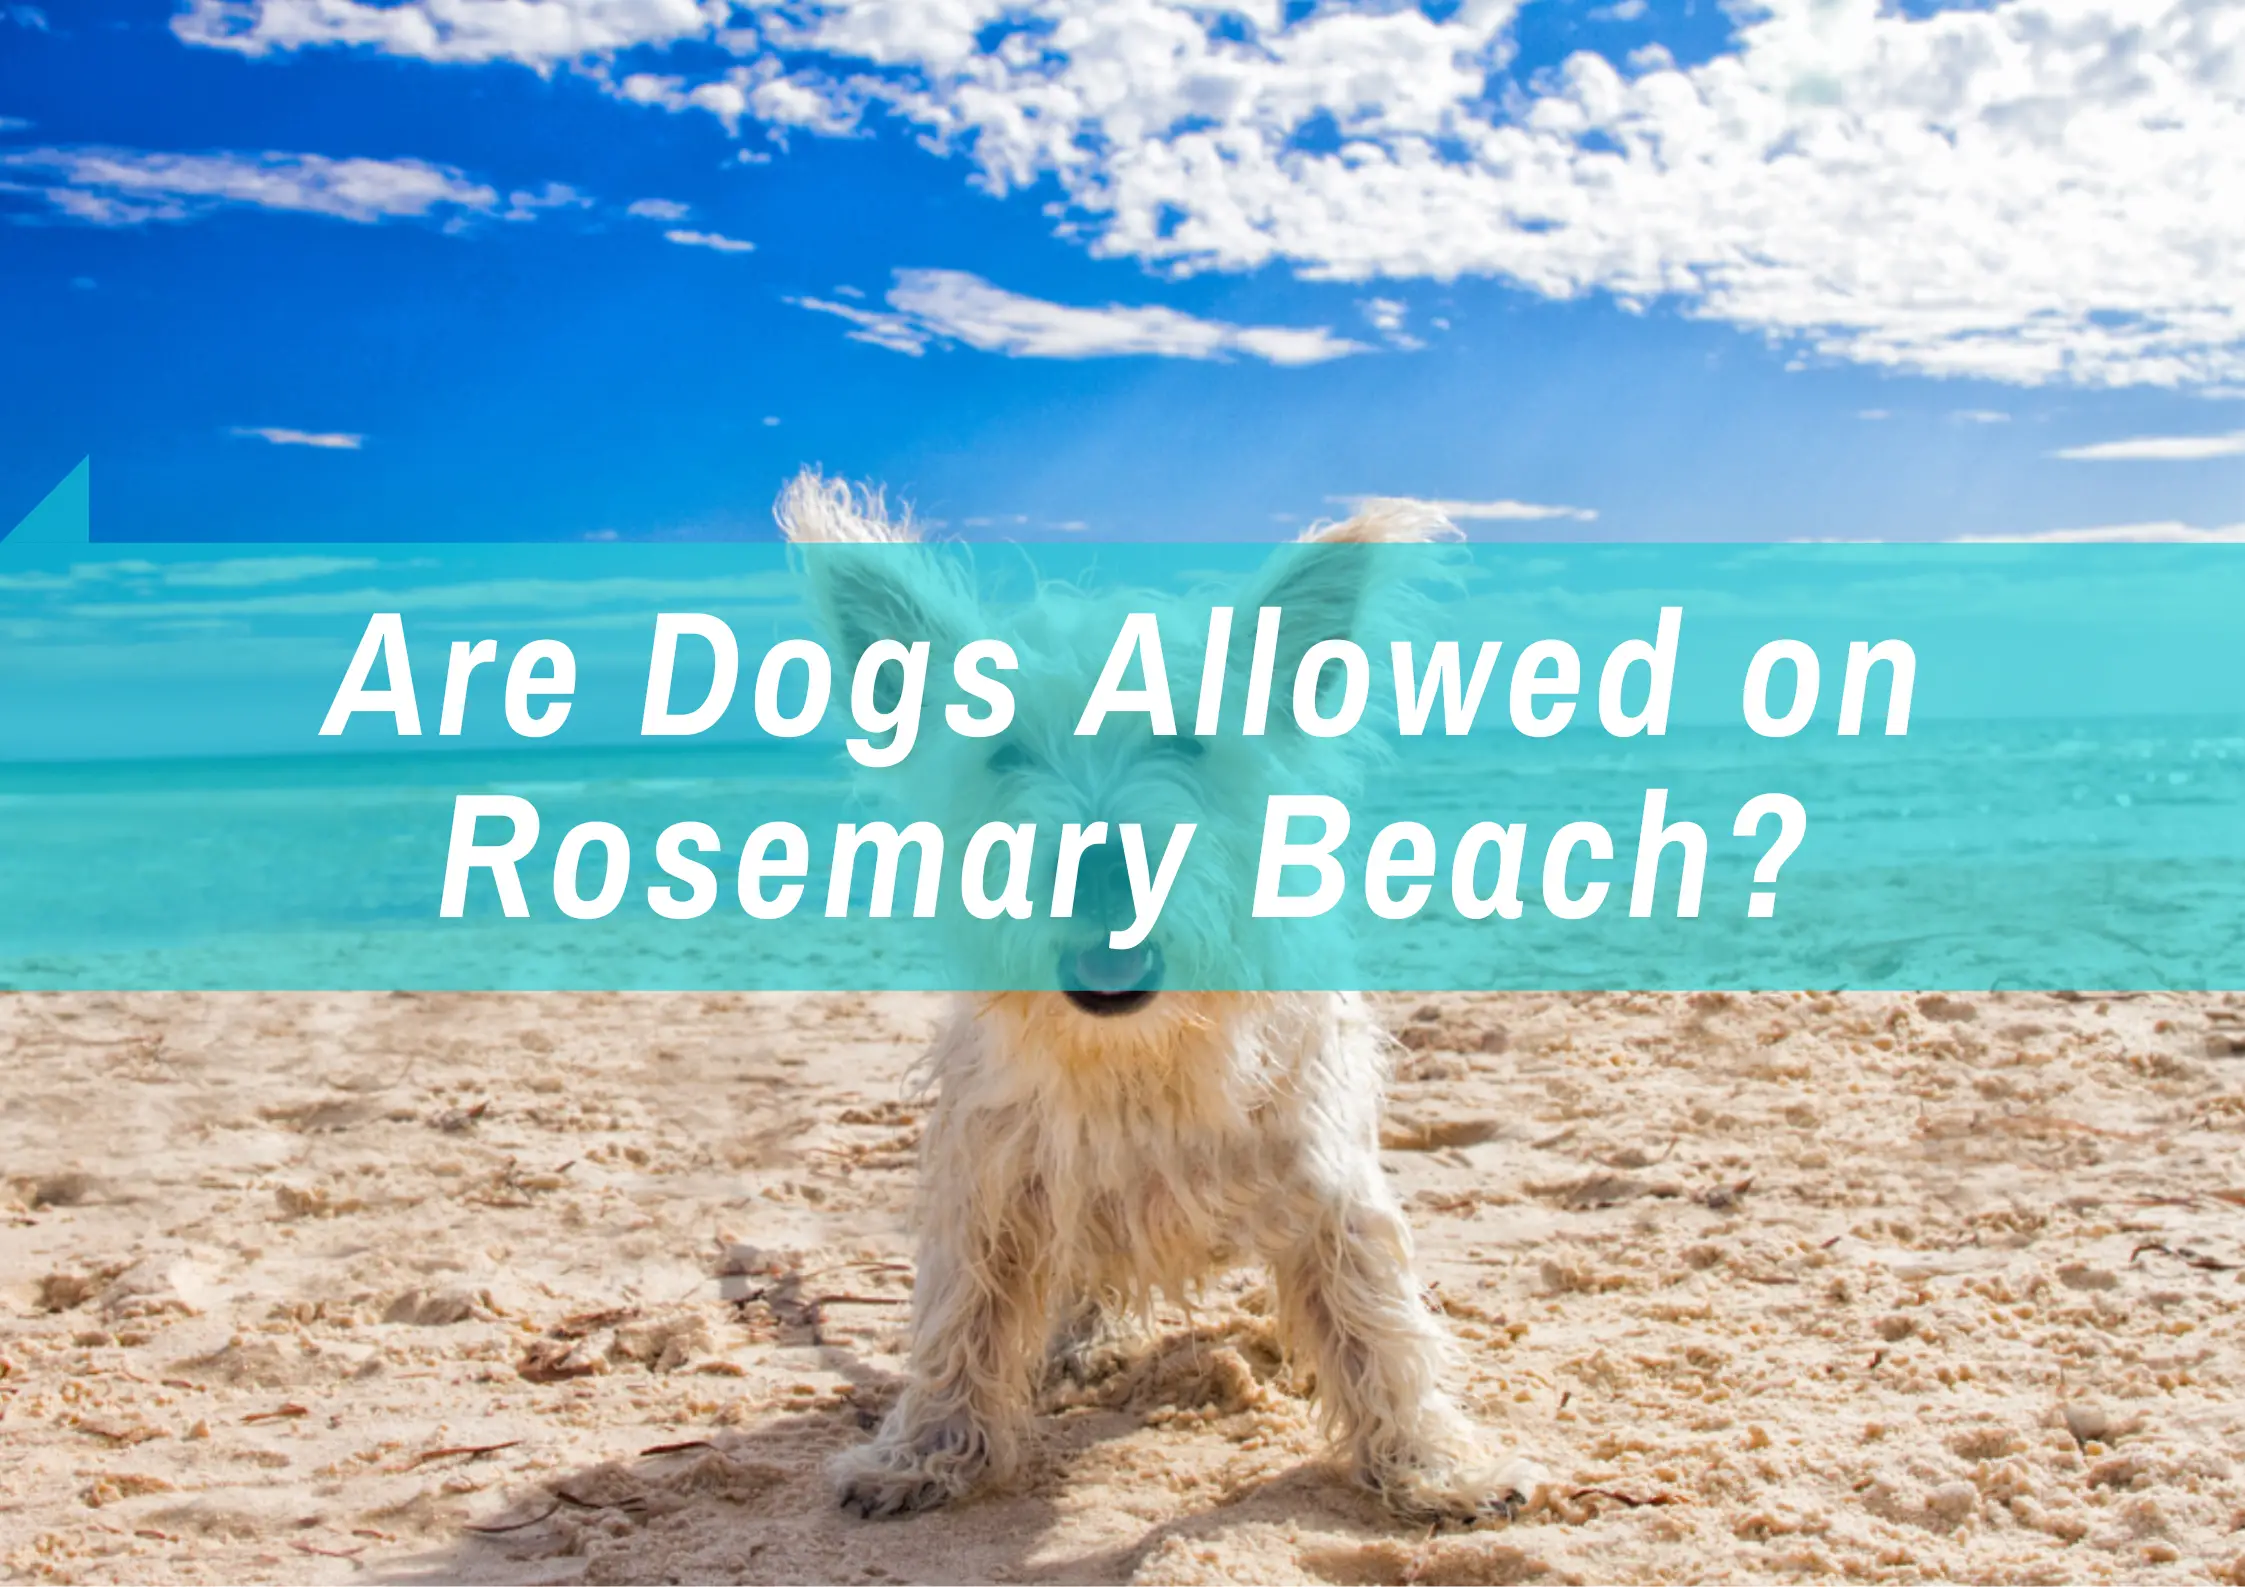 Can you bring dogs to Rosemary Beach?